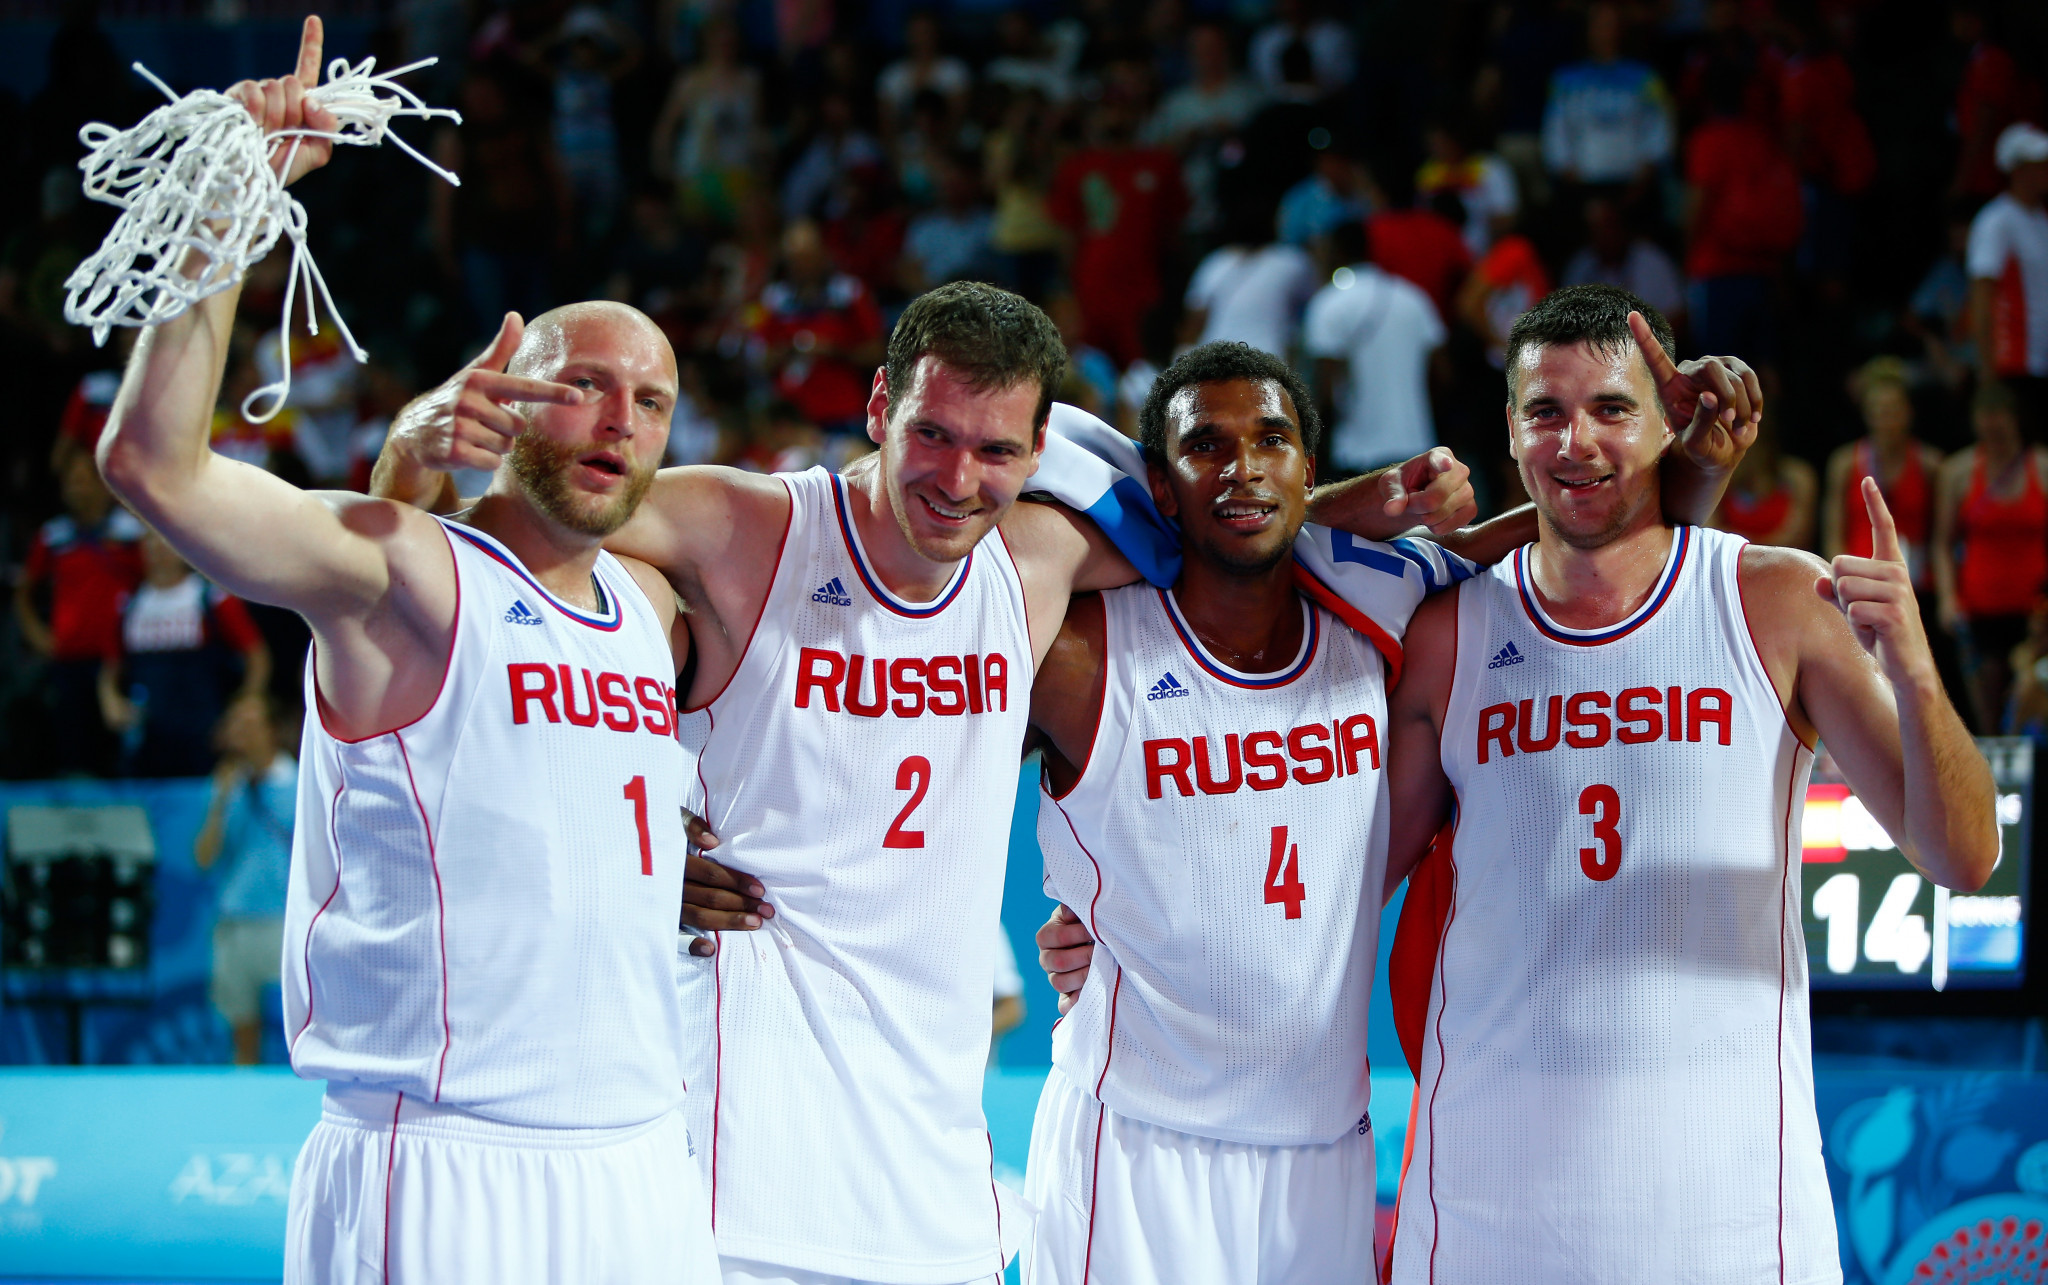 Defending champions Russia impress in 3x3 basketball as Minsk 2019 sporting action begins